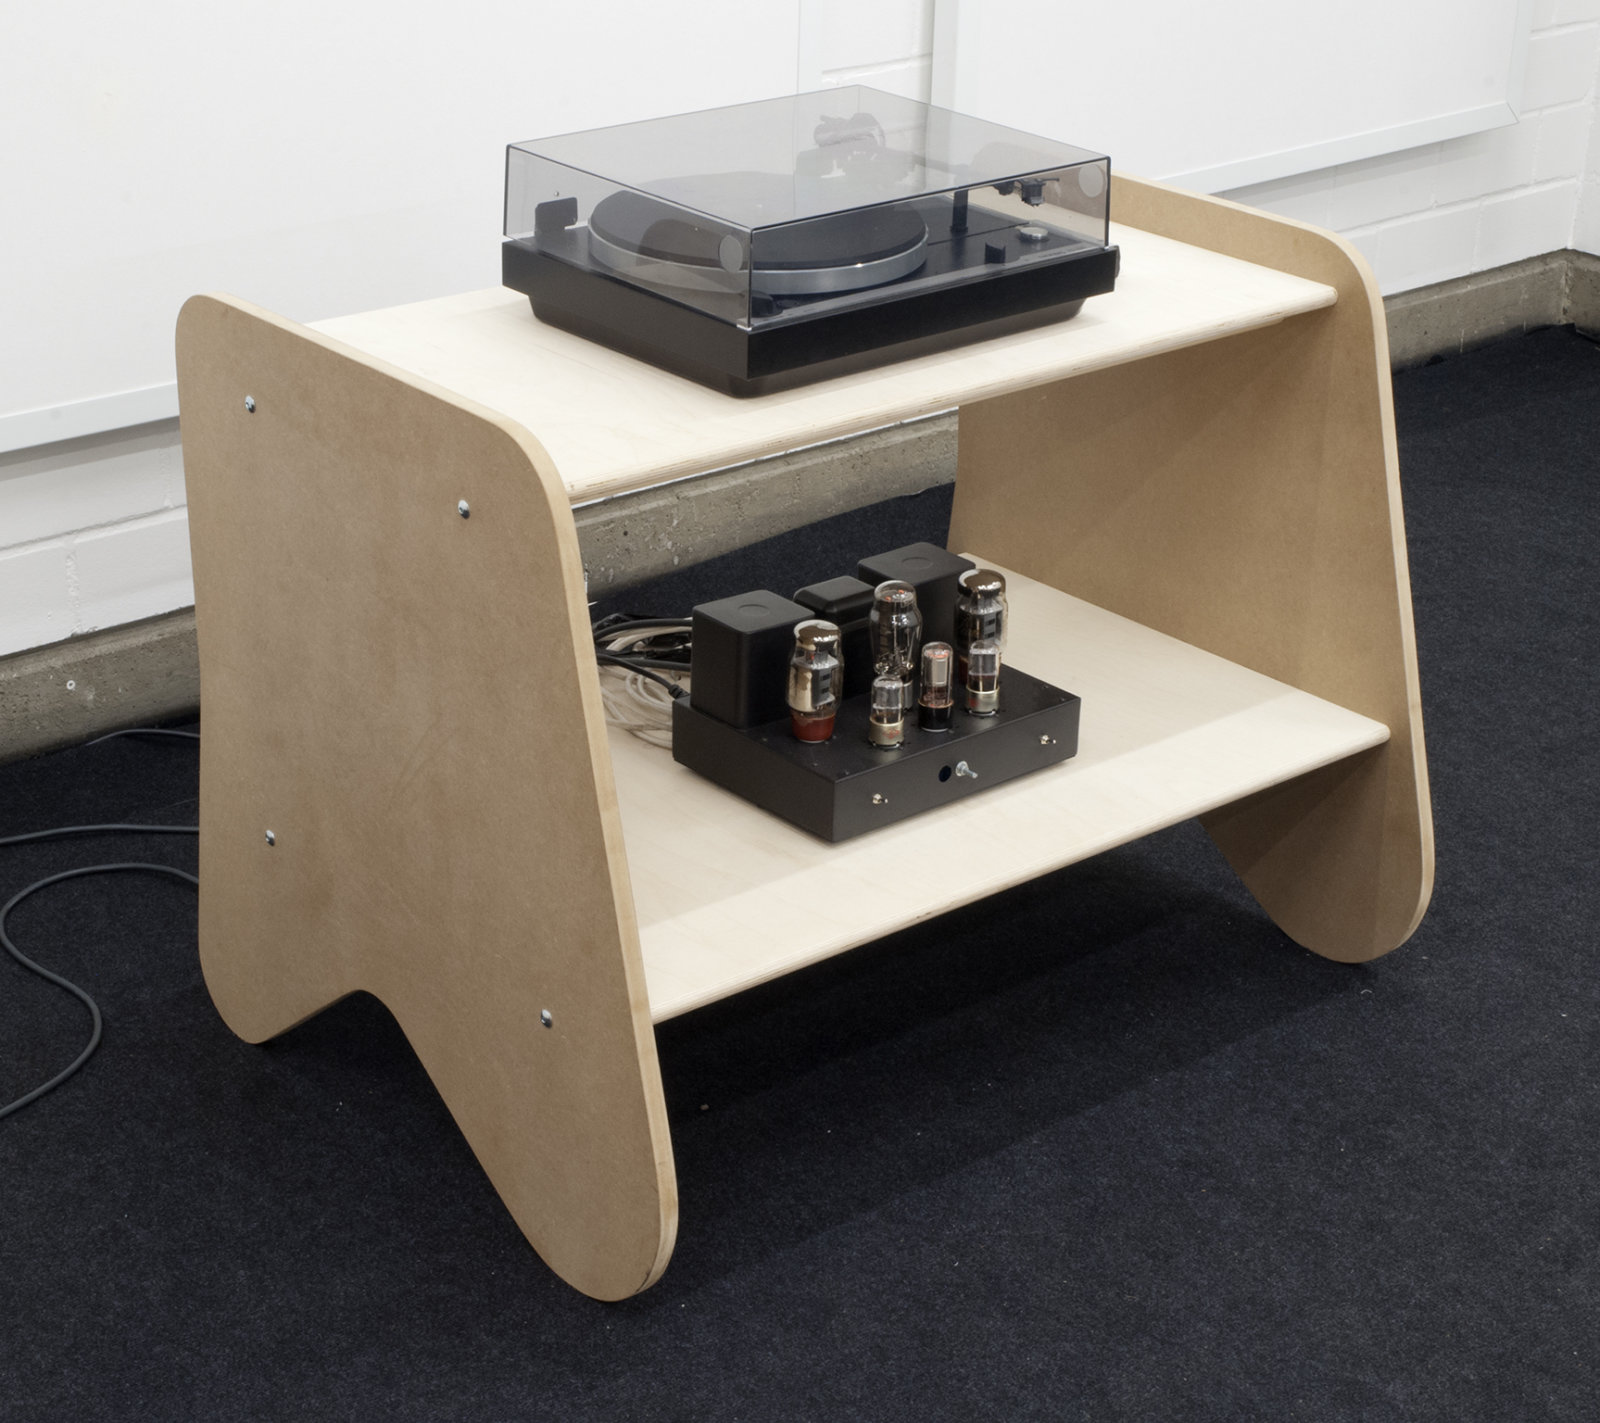 Kevin Schmidt, DIY HIFI, 2014, wood, lowther dx55 speakers, DIY kit tube amplifier, record player, canvas, cables, hardware, each 117 x 55 x 61 in. (297 x 139 x 154 cm). Installation view, Braunschweig PROJECTS, Hochschule für Bildende Künste Braunschweig, Braunschweig, Germany, 2014